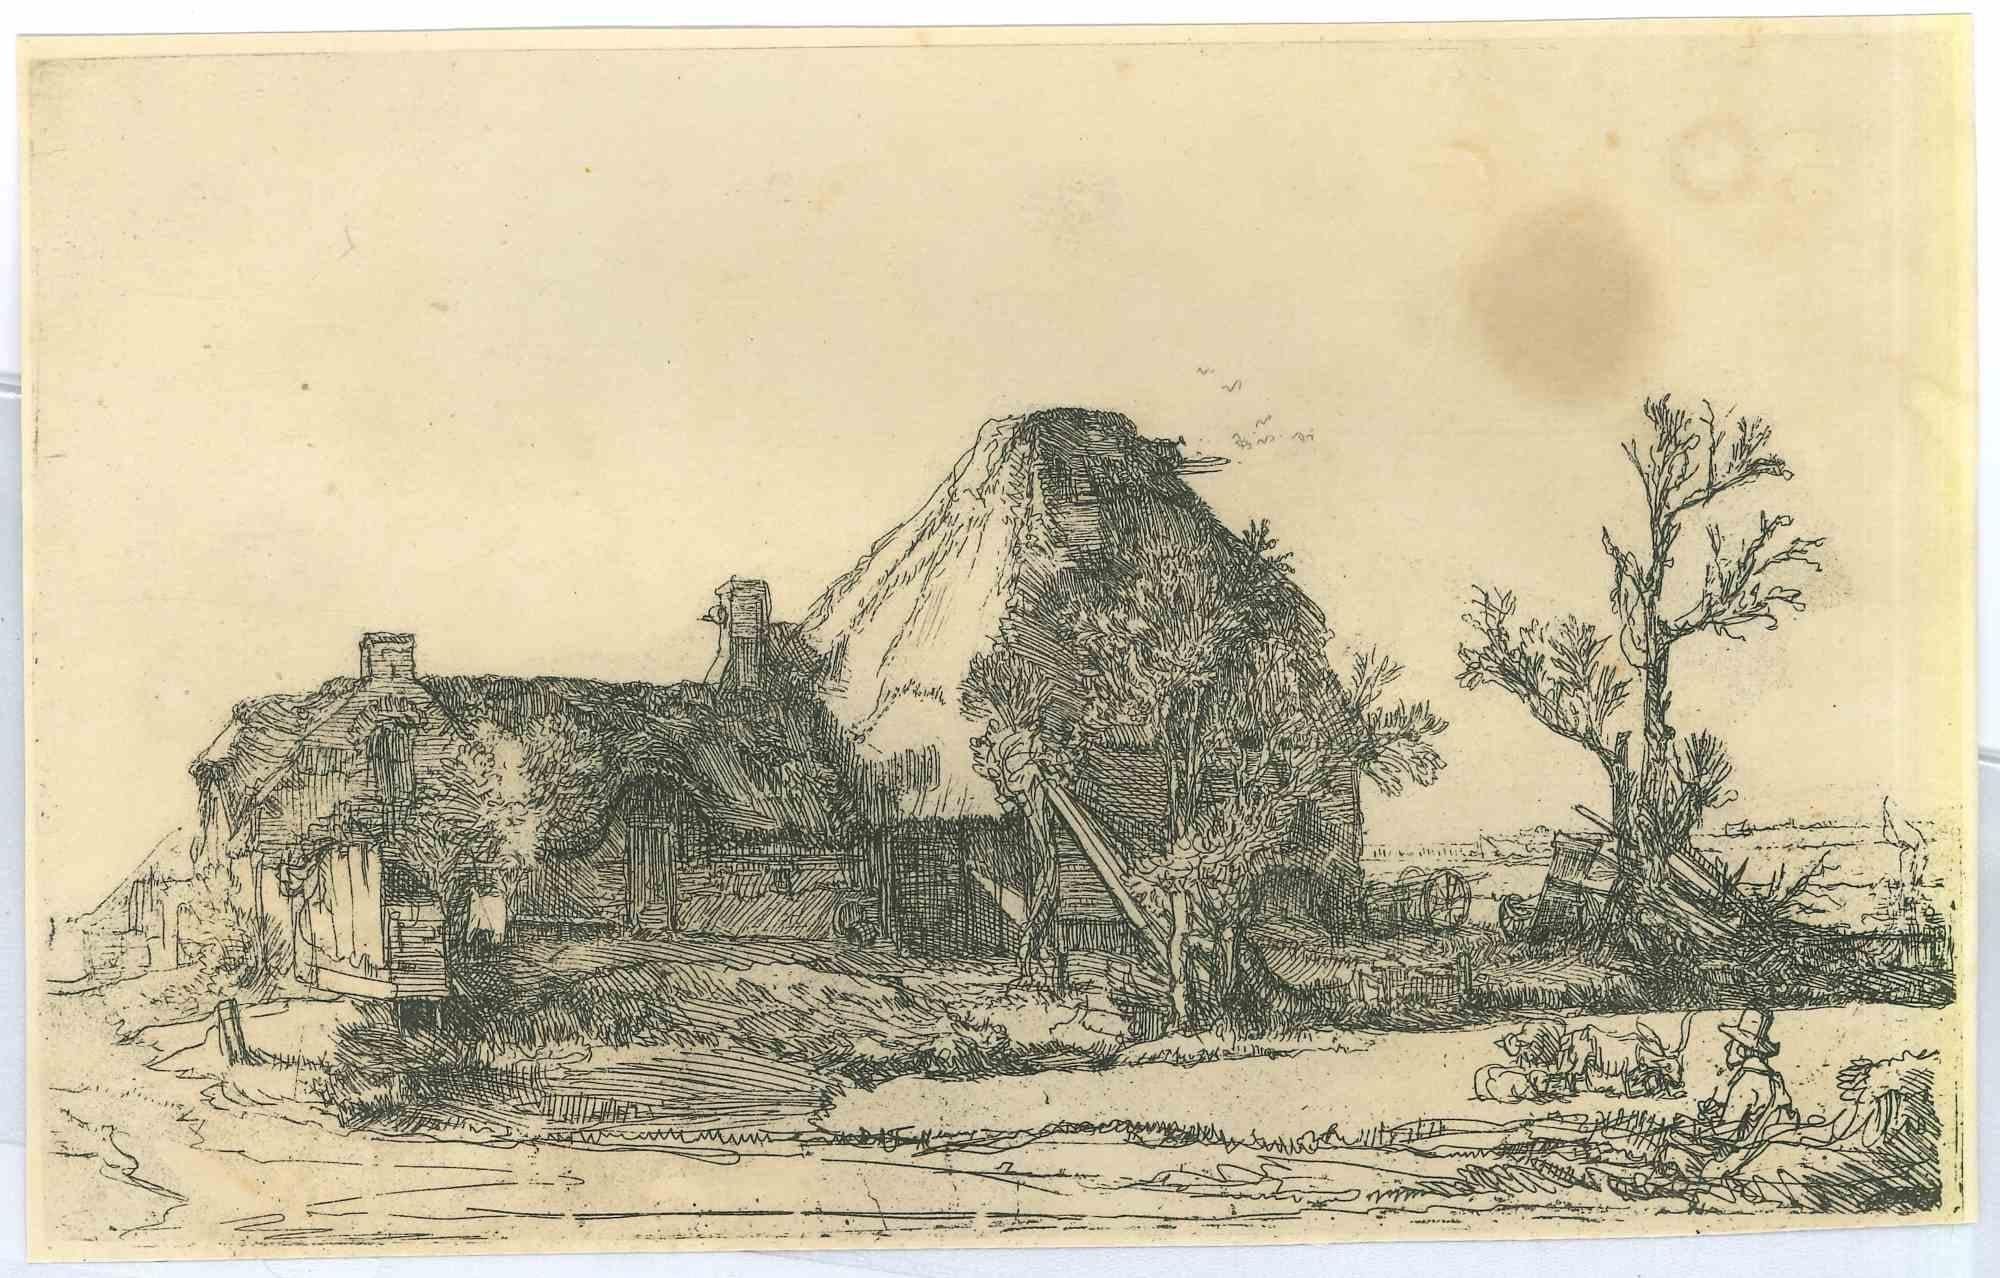 Charles Amand Durand Figurative Print - Cottages and Farm Buildings  - Engraving after Rembrandt - 19th Century